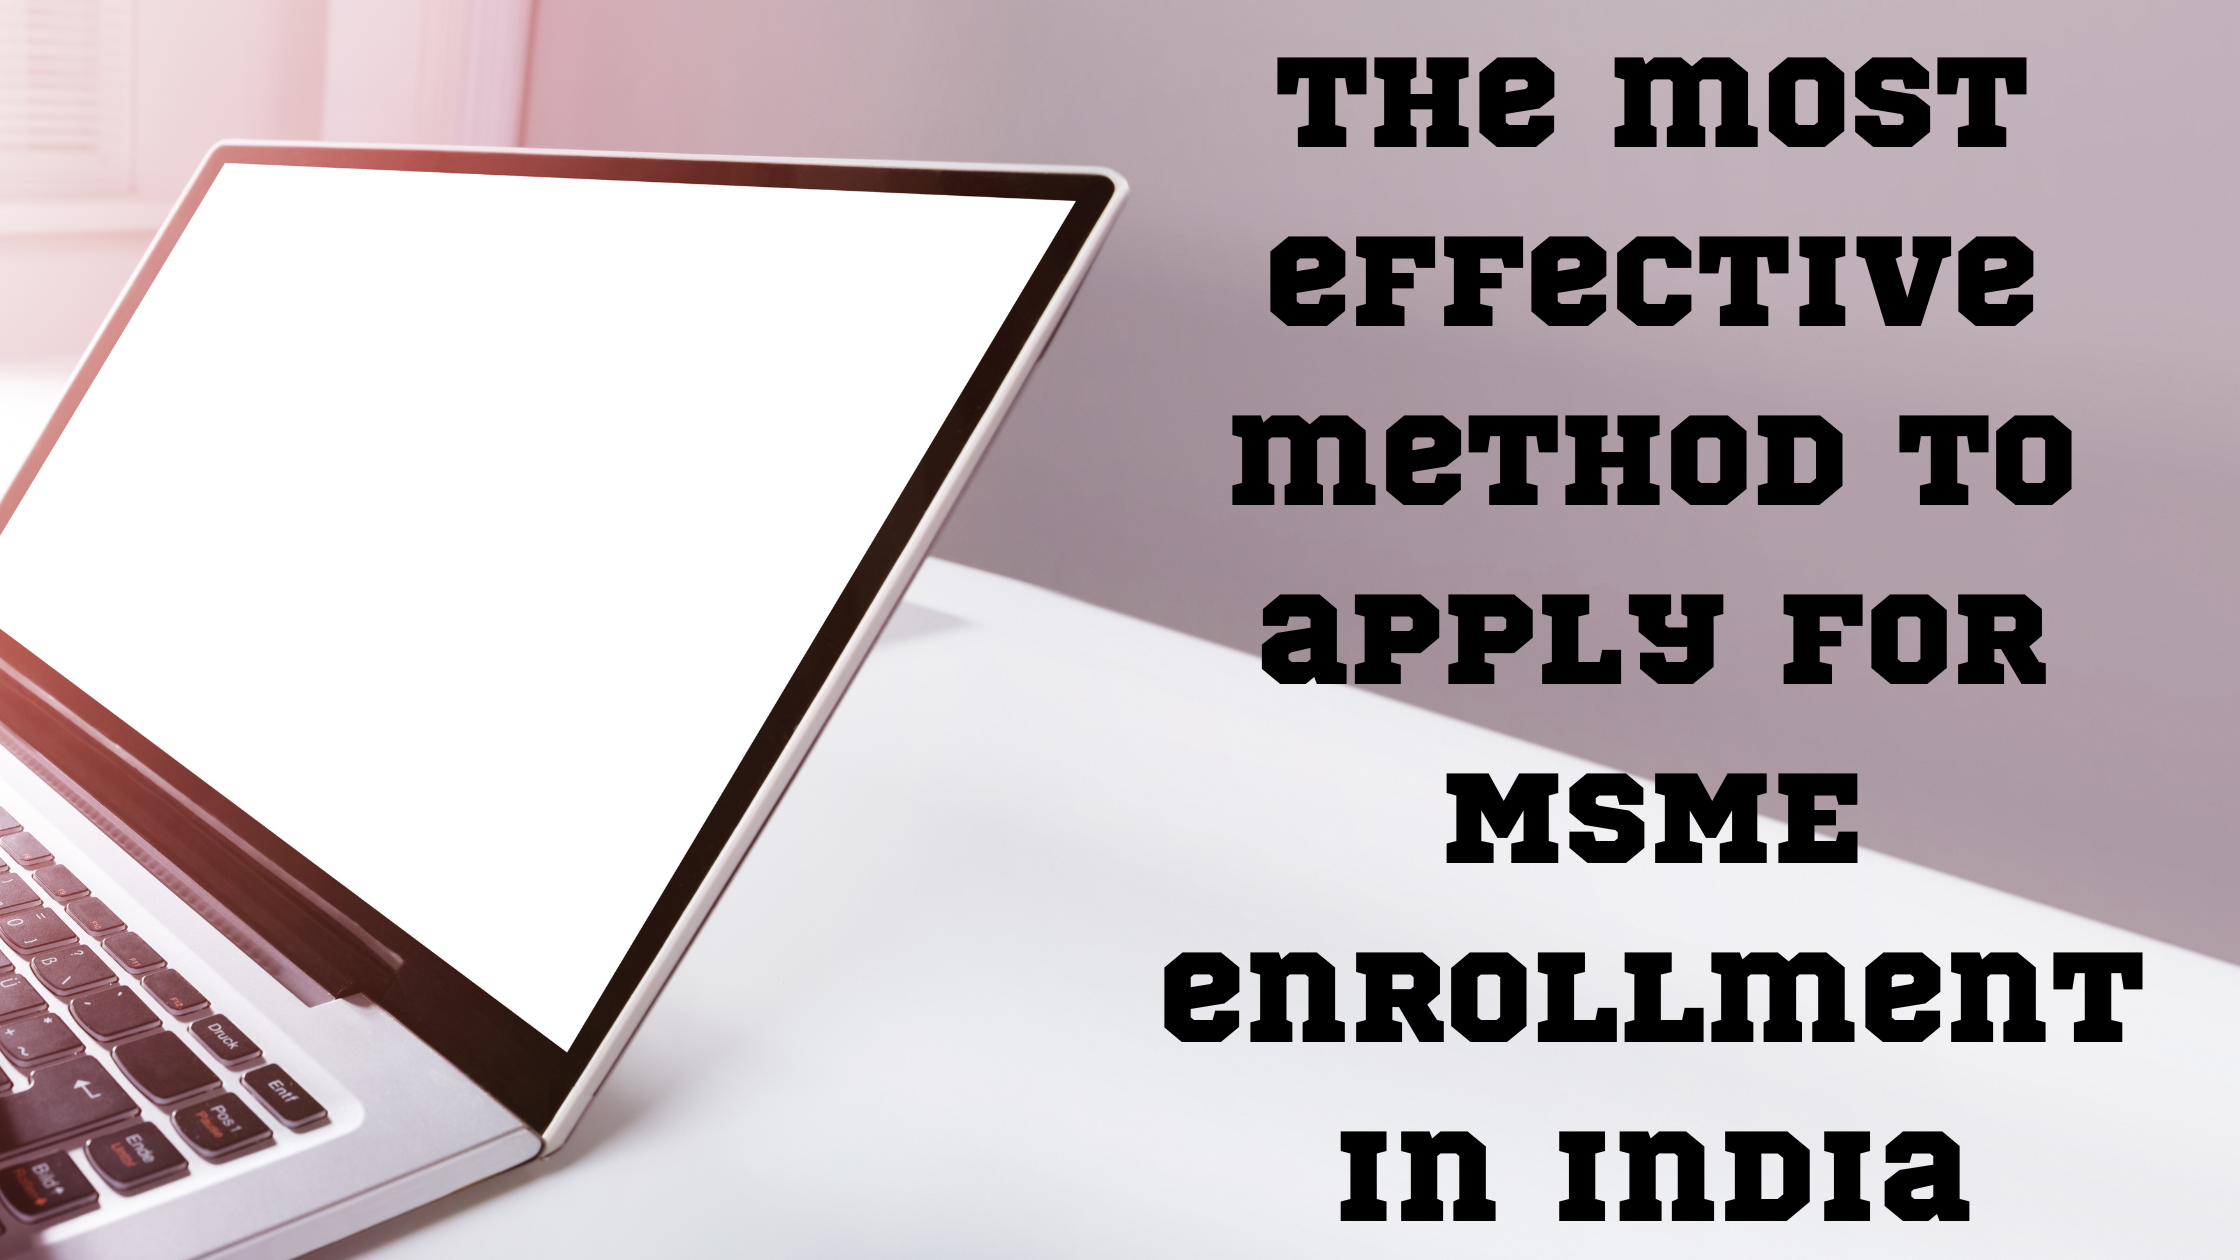 The most effective method to apply for MSME enrollment in India